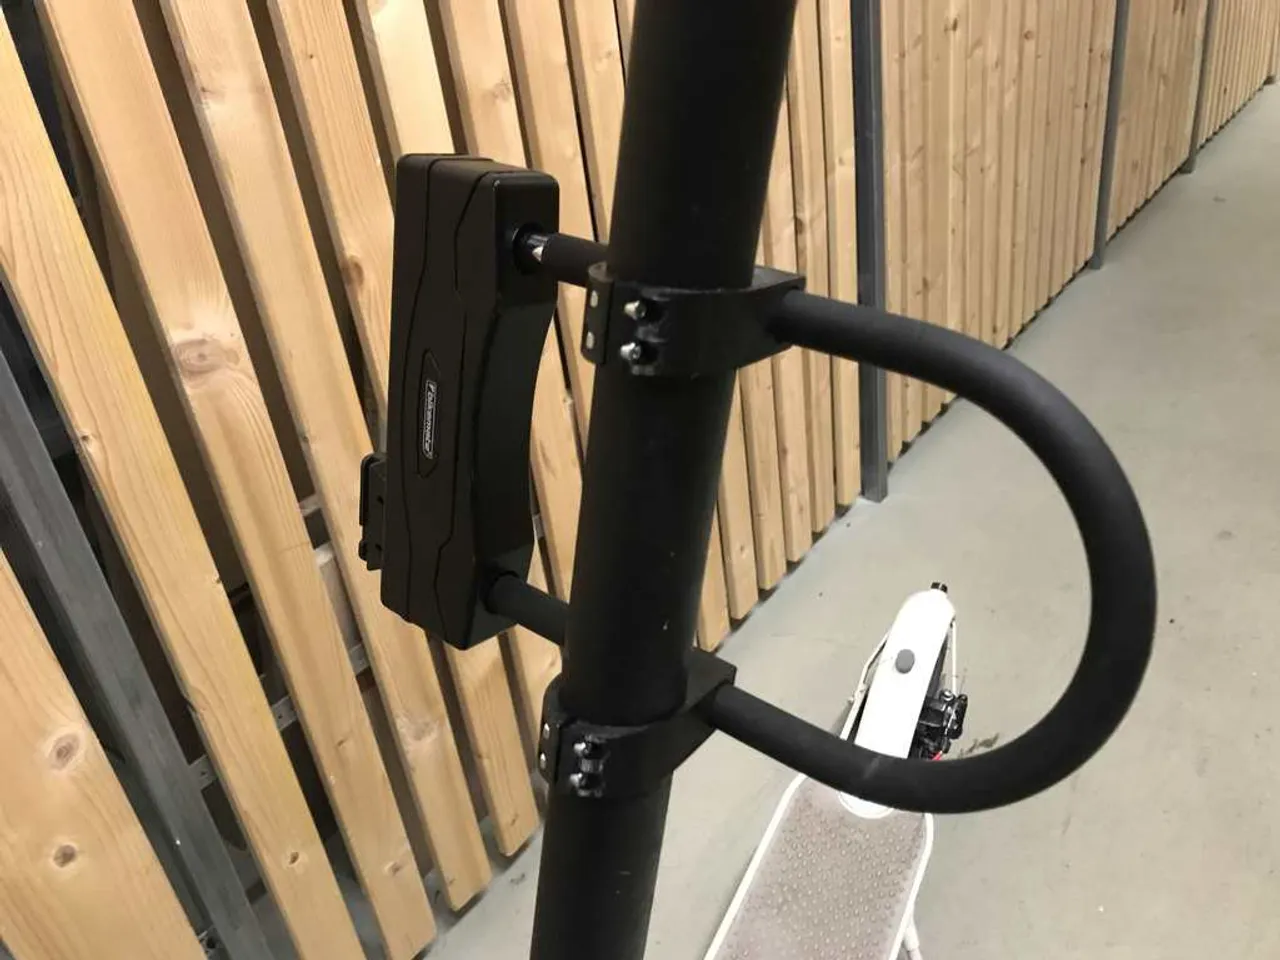 U-Lock Mount Xiaomi Scooter / Pro by Christoph | Download STL | Printables.com